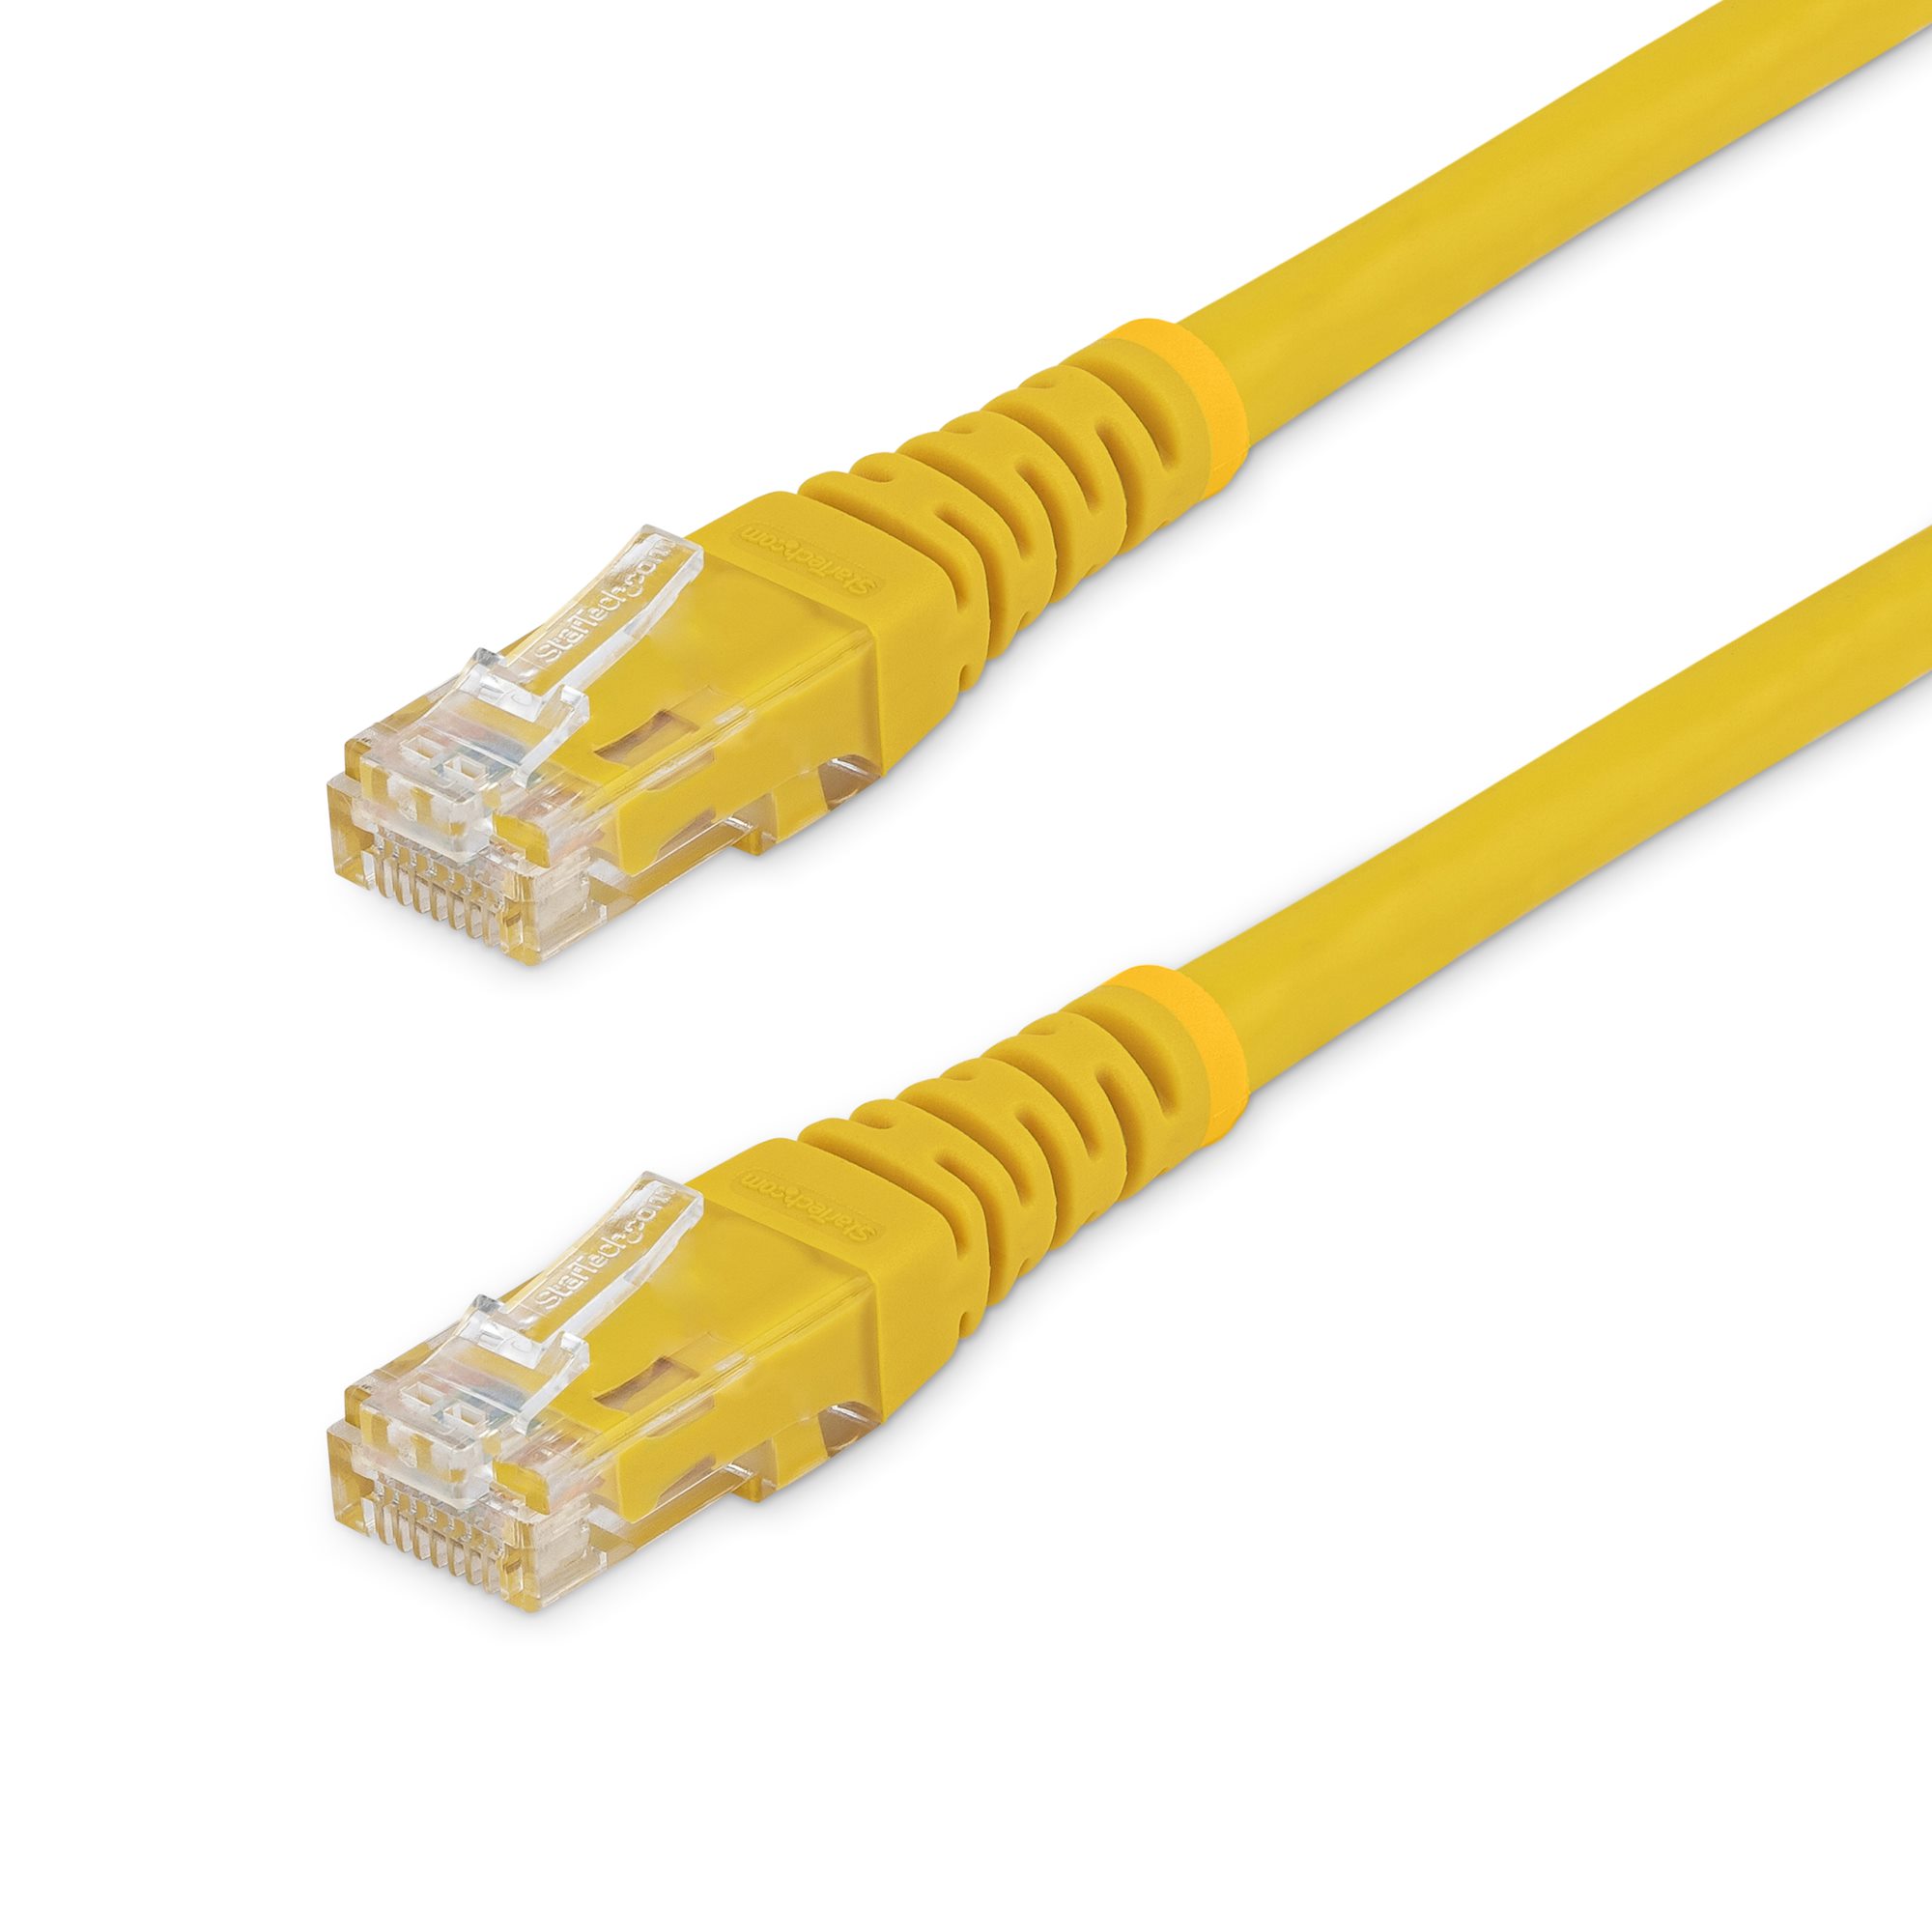 50ft CAT6 Ethernet Cable - Yellow CAT 6 Gigabit Ethernet Wire -650MHz 100W  PoE RJ45 UTP Molded Network/Patch Cord w/Strain Relief/Fluke Tested/Wiring